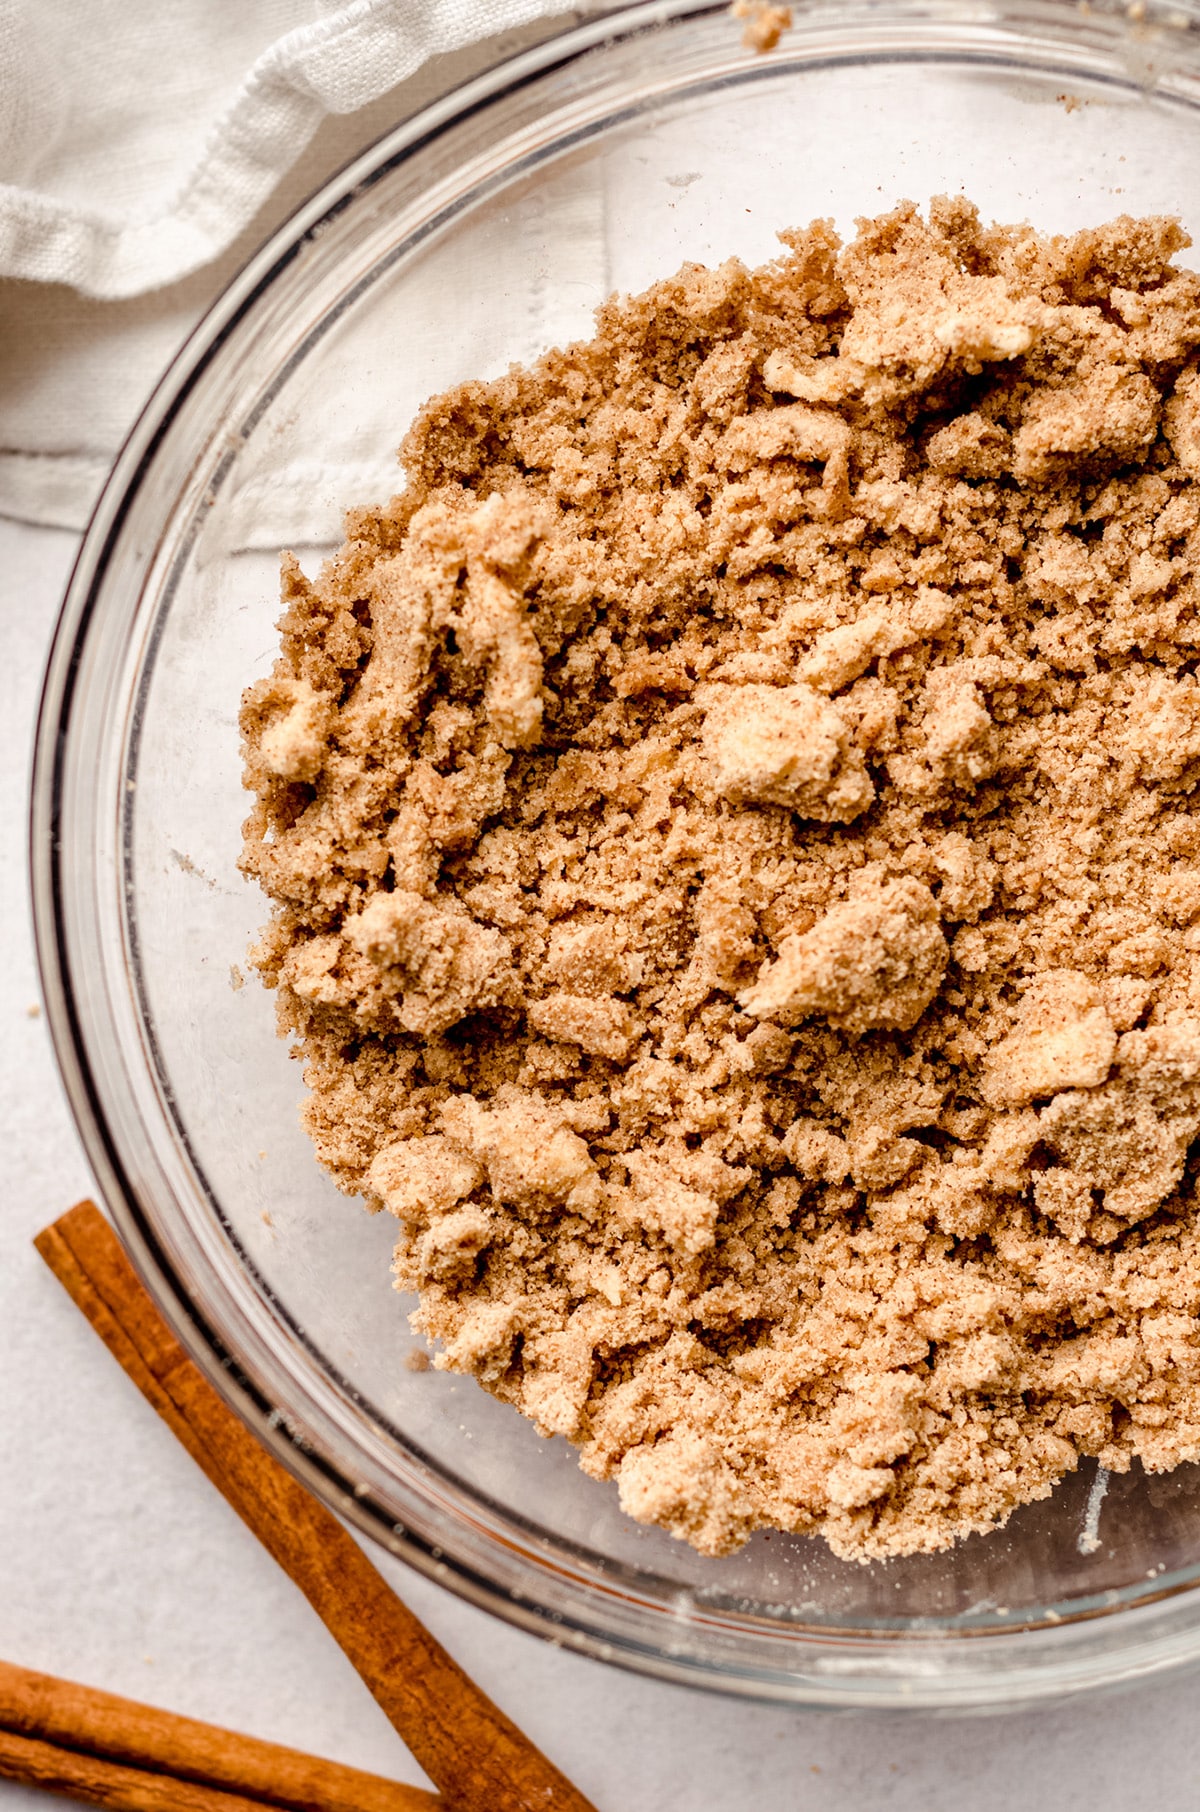 How To Make Streusel (Crumb Topping)